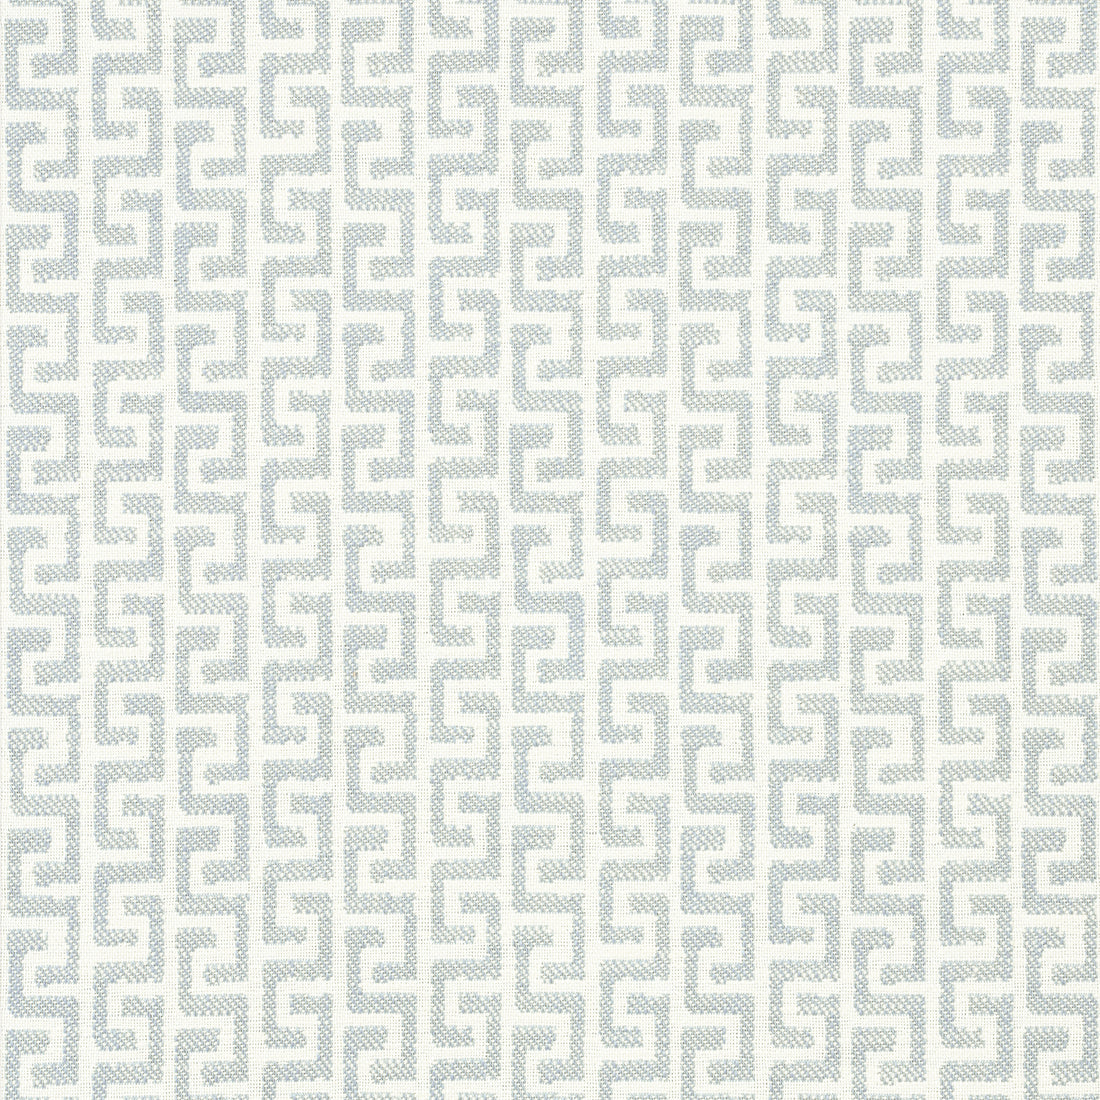 Merritt fabric in glacier color - pattern number W74247 - by Thibaut in the Passage collection